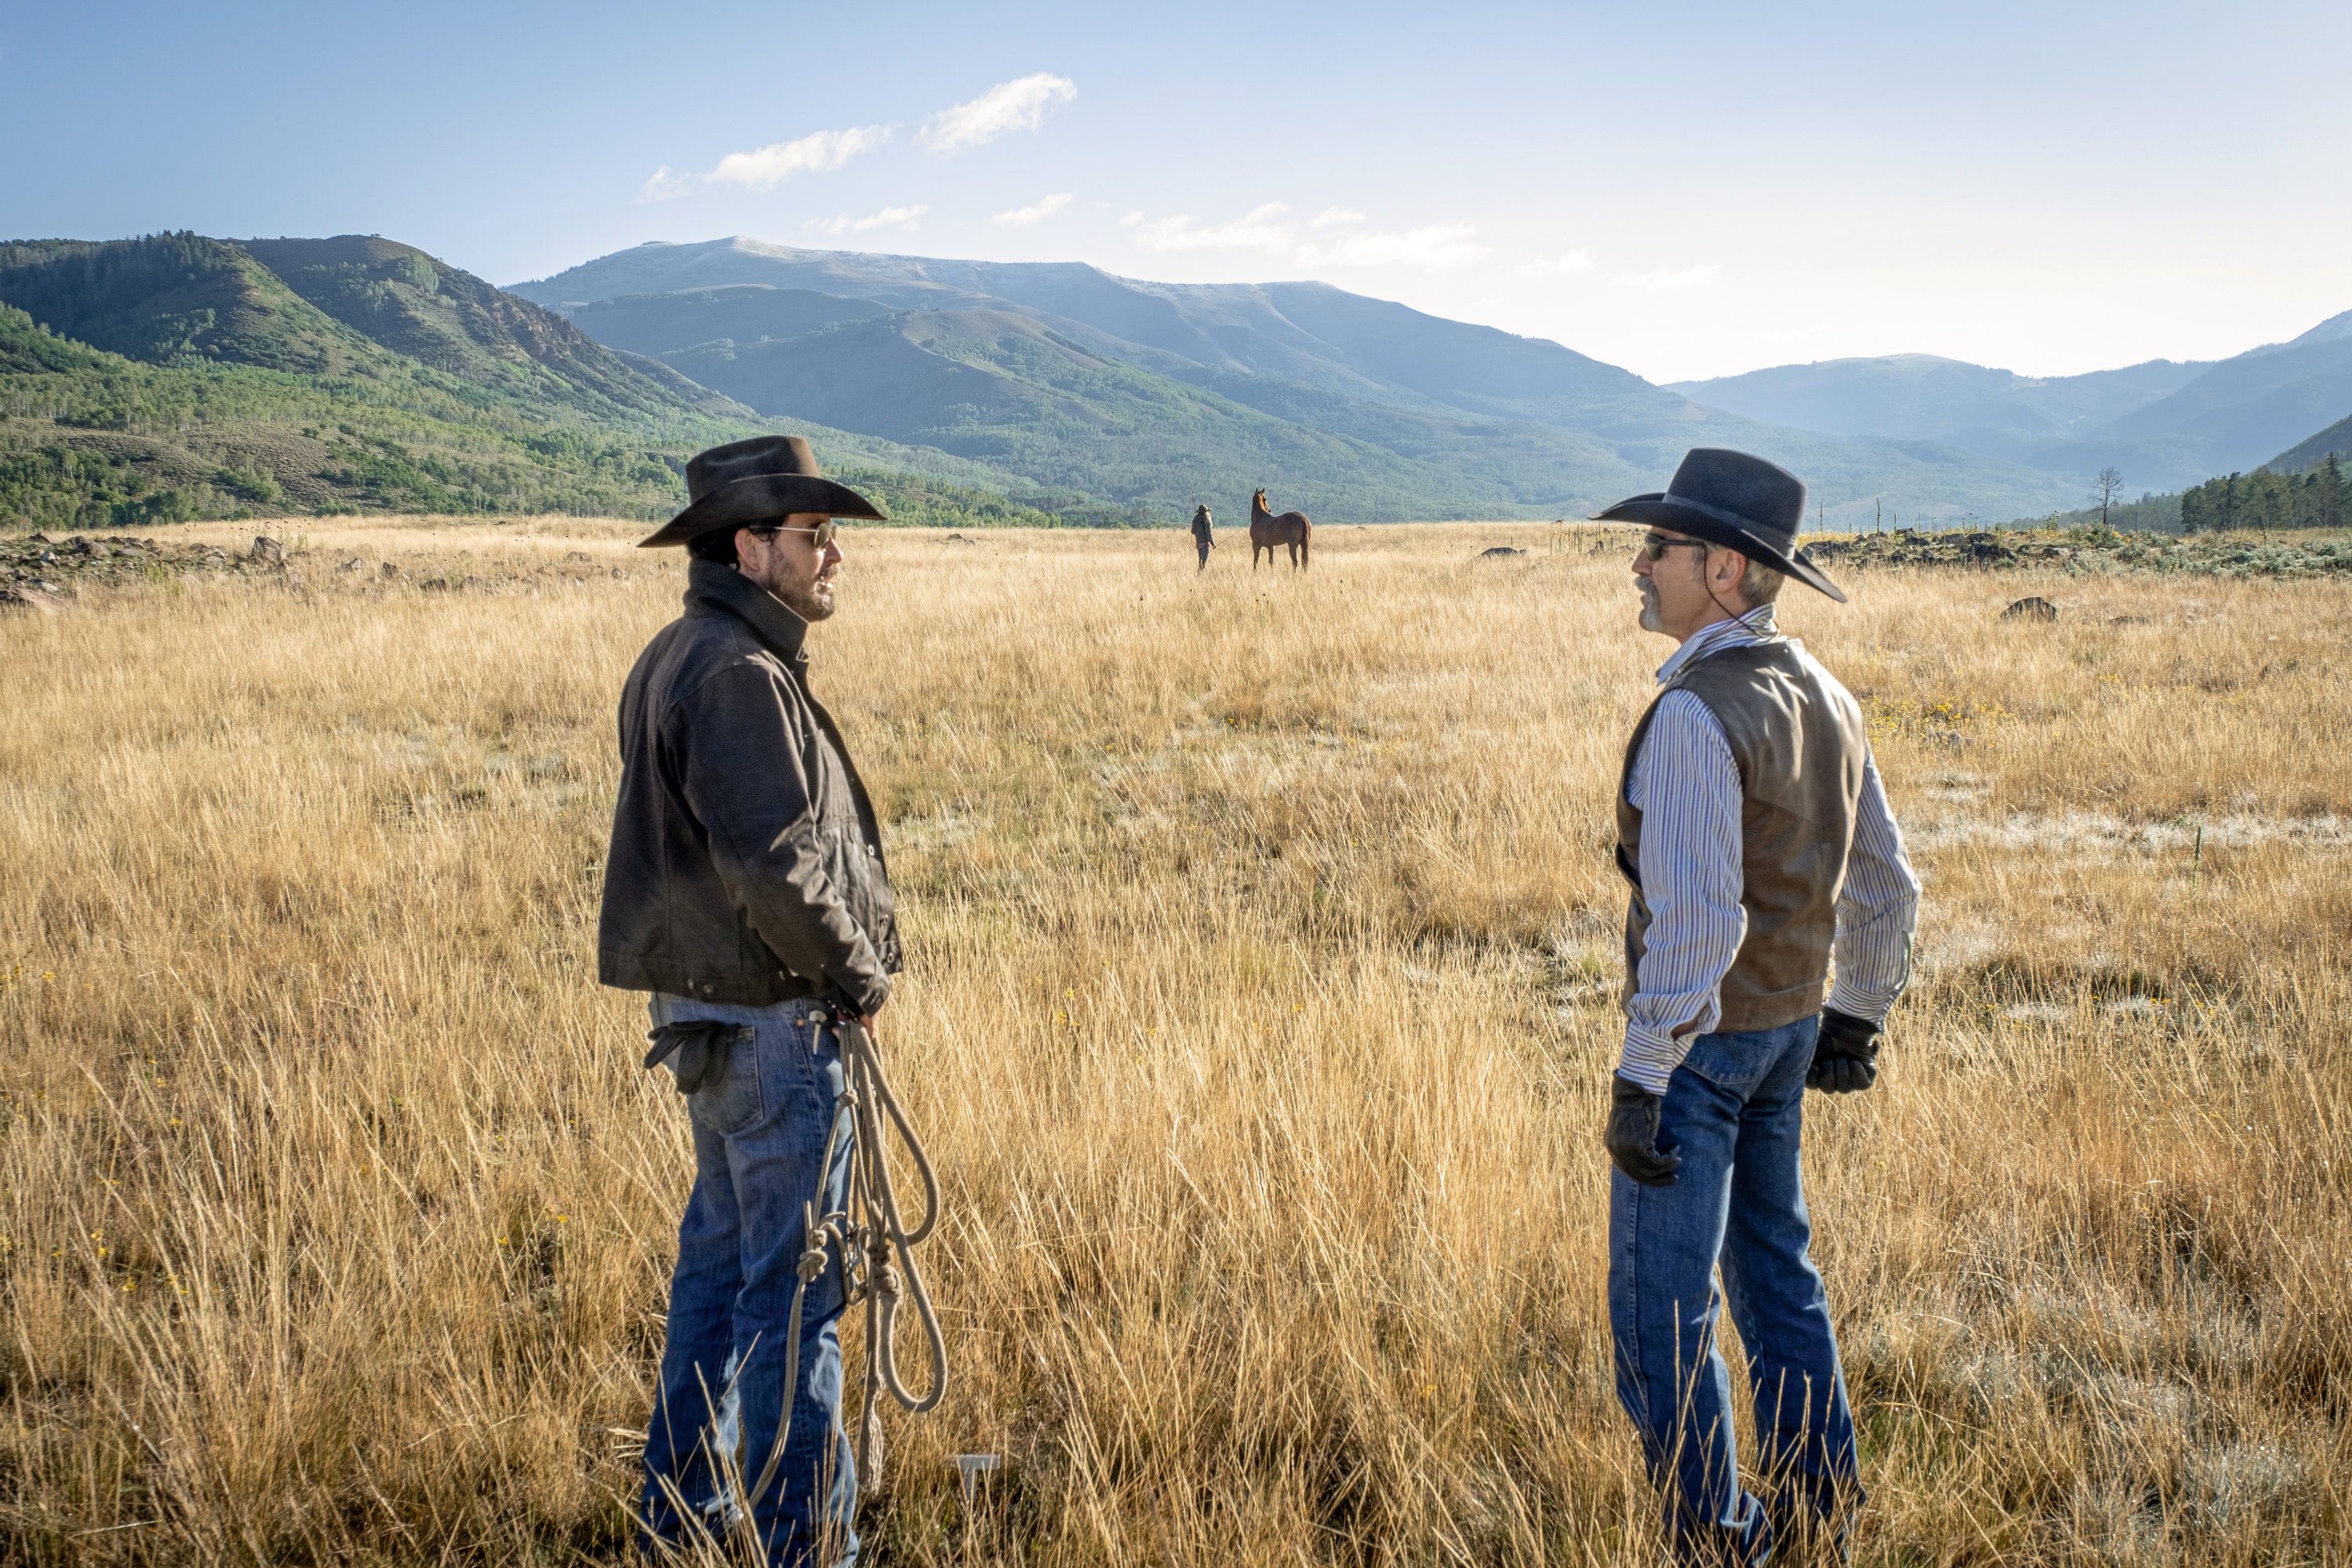 See Pictures From ‘Yellowstone’ Season 3, Episode 8, ‘I Killed A Man